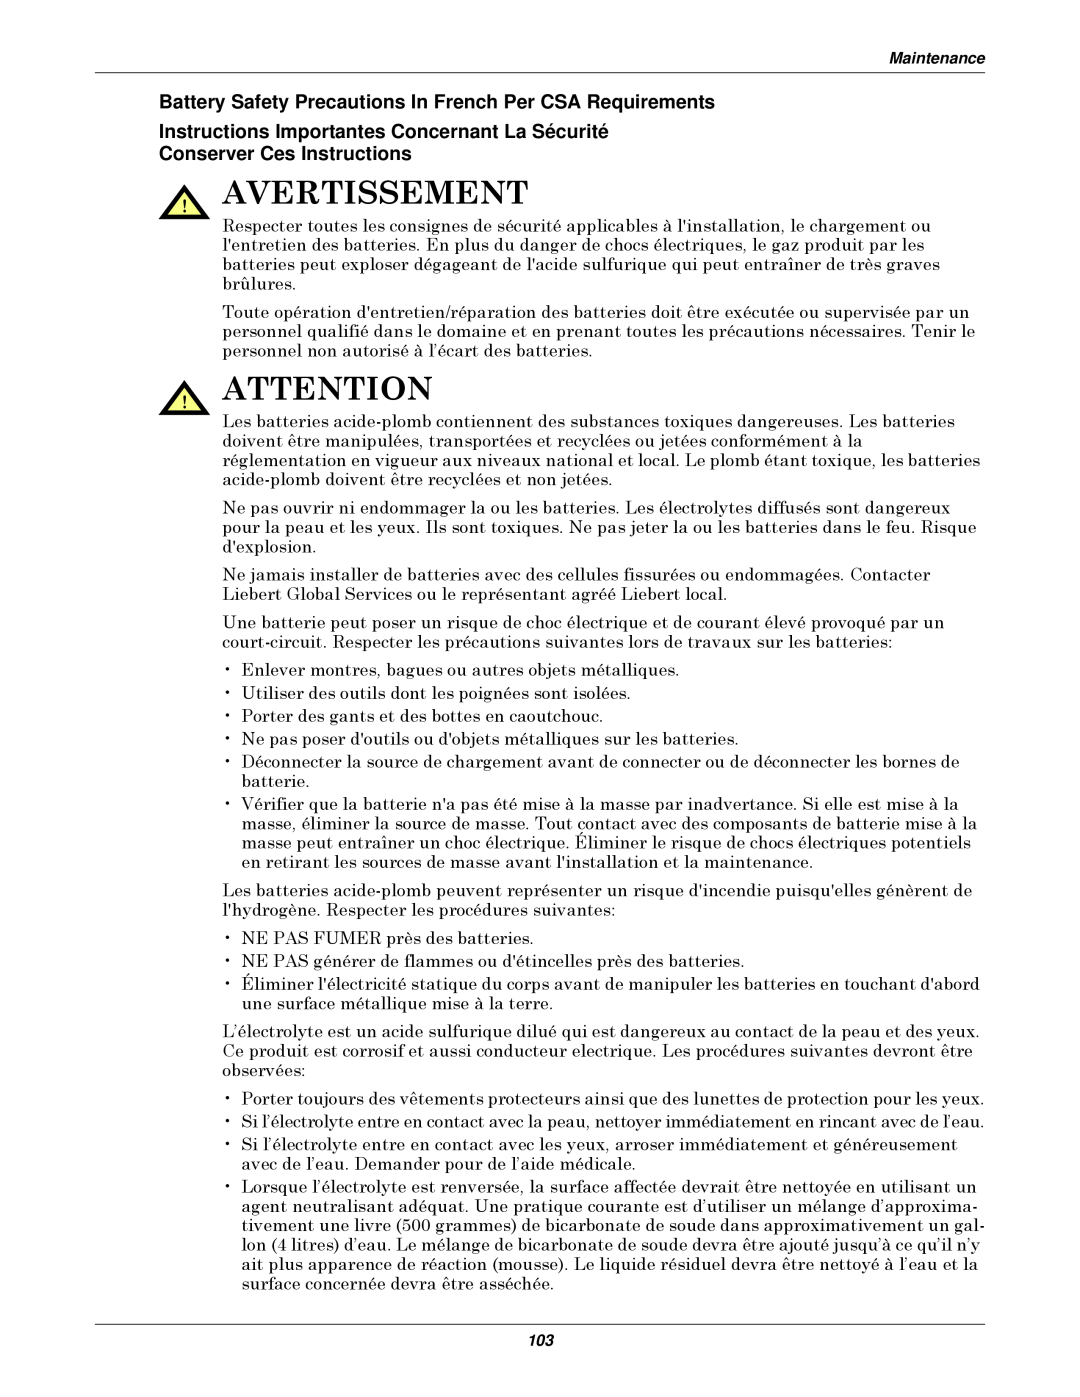 Emerson Series 610 Avertissement, Battery Safety Precautions In French Per CSA Requirements, Conserver Ces Instructions 